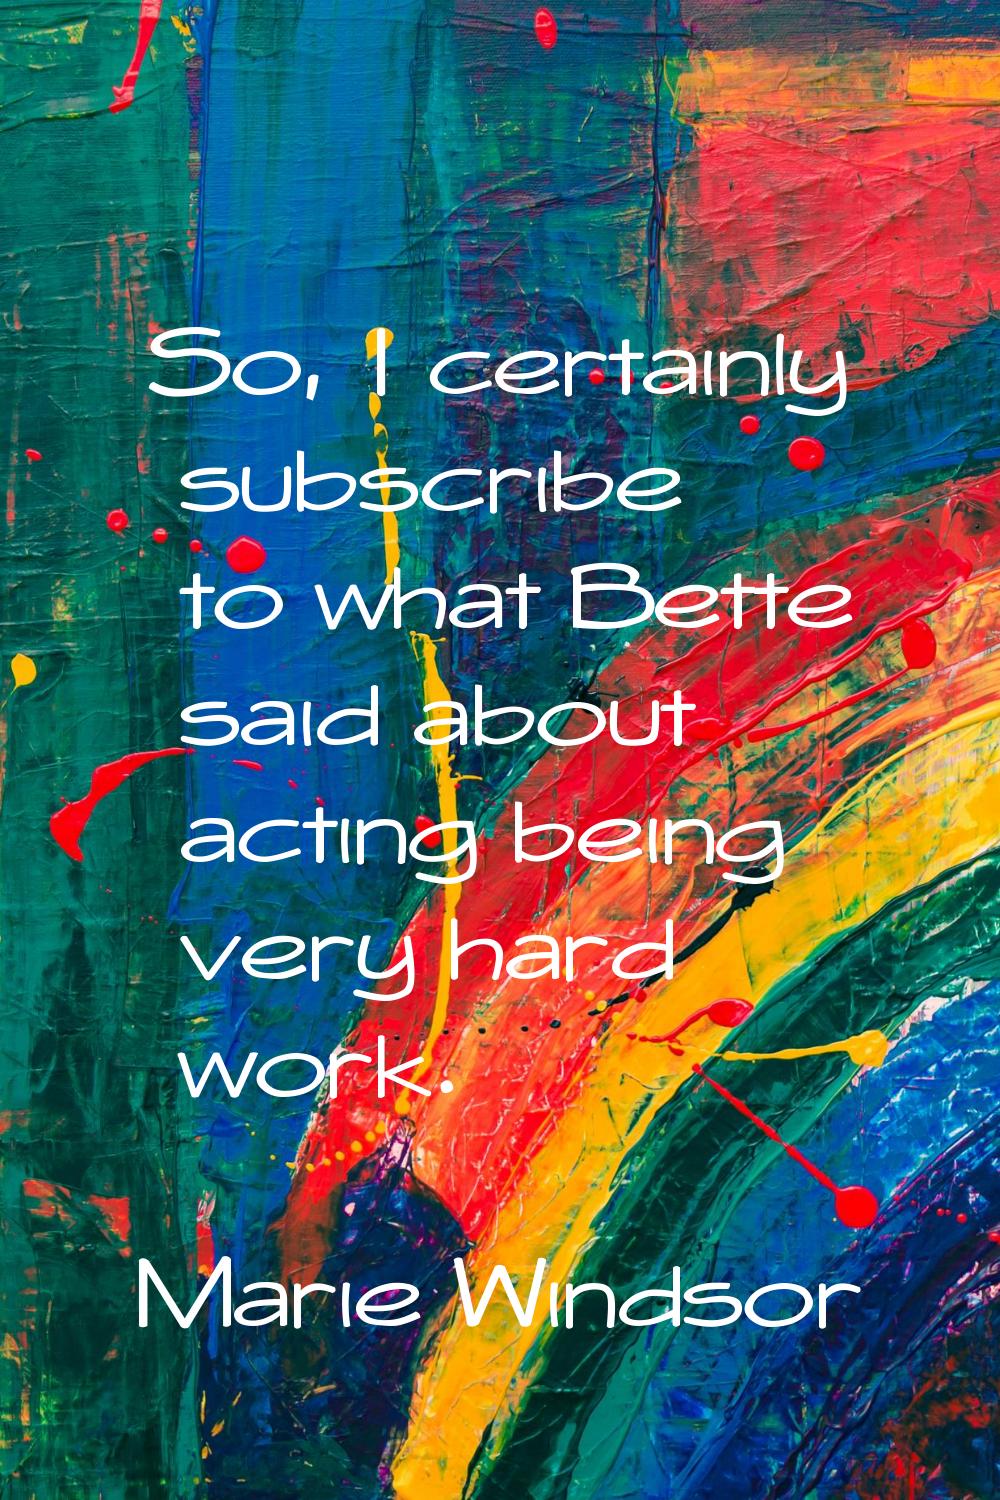 So, I certainly subscribe to what Bette said about acting being very hard work.